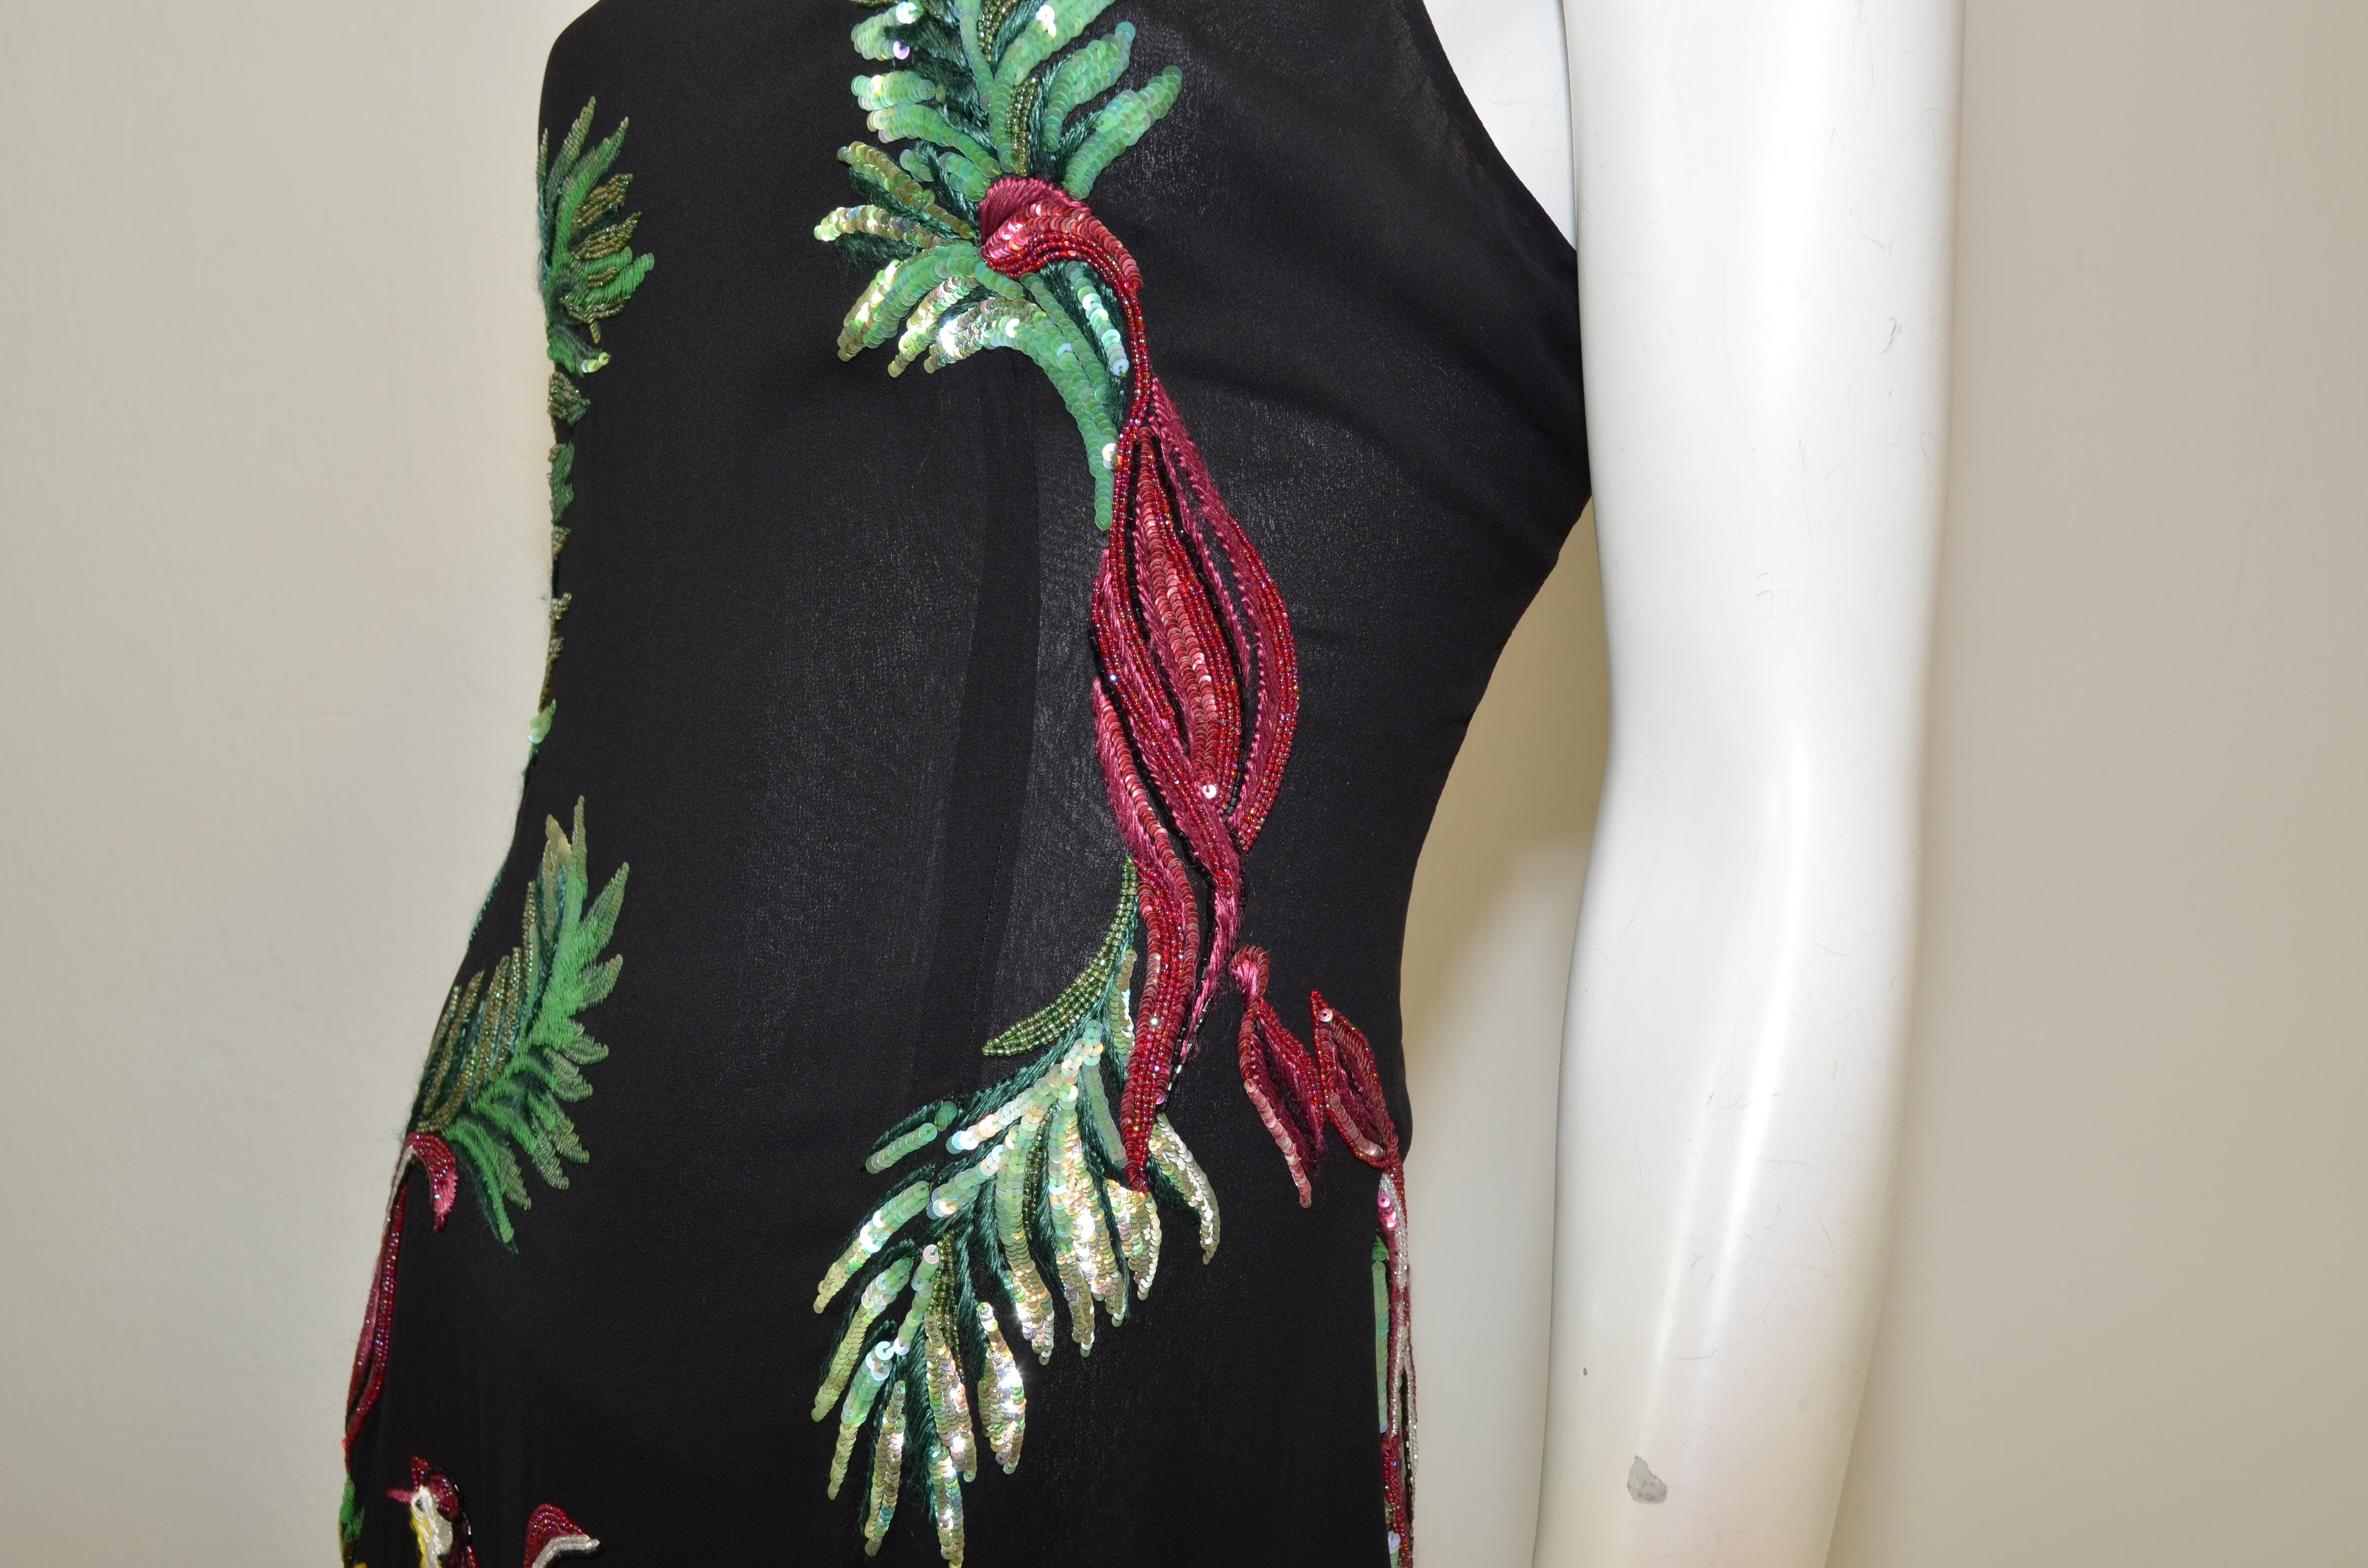 Givenchy Couture by Alexander McQueen Vintage 1997 Sequin Embroidered Bird Dress In Excellent Condition For Sale In Carmel, CA